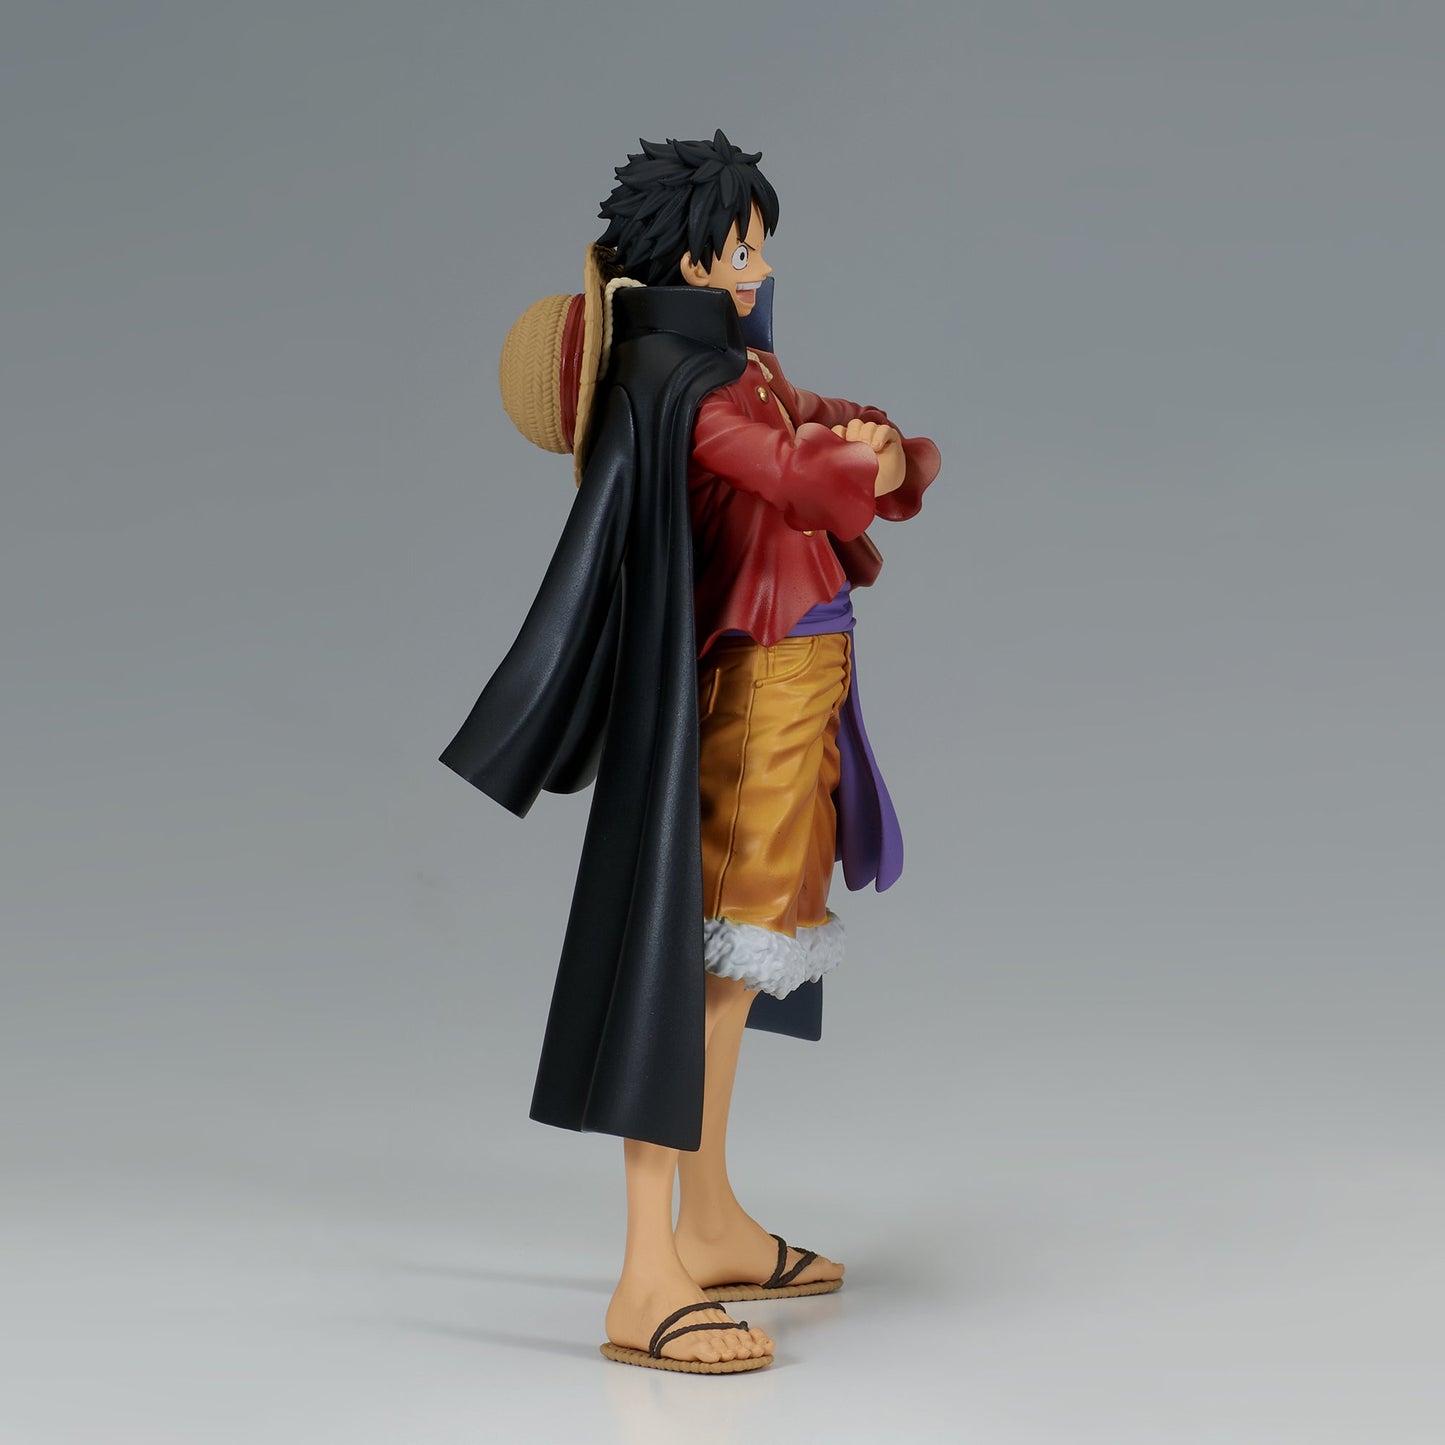 Monkey D. Luffy Wano Country (One Piece) The Grandline Series DXF Vol. 4 Statue